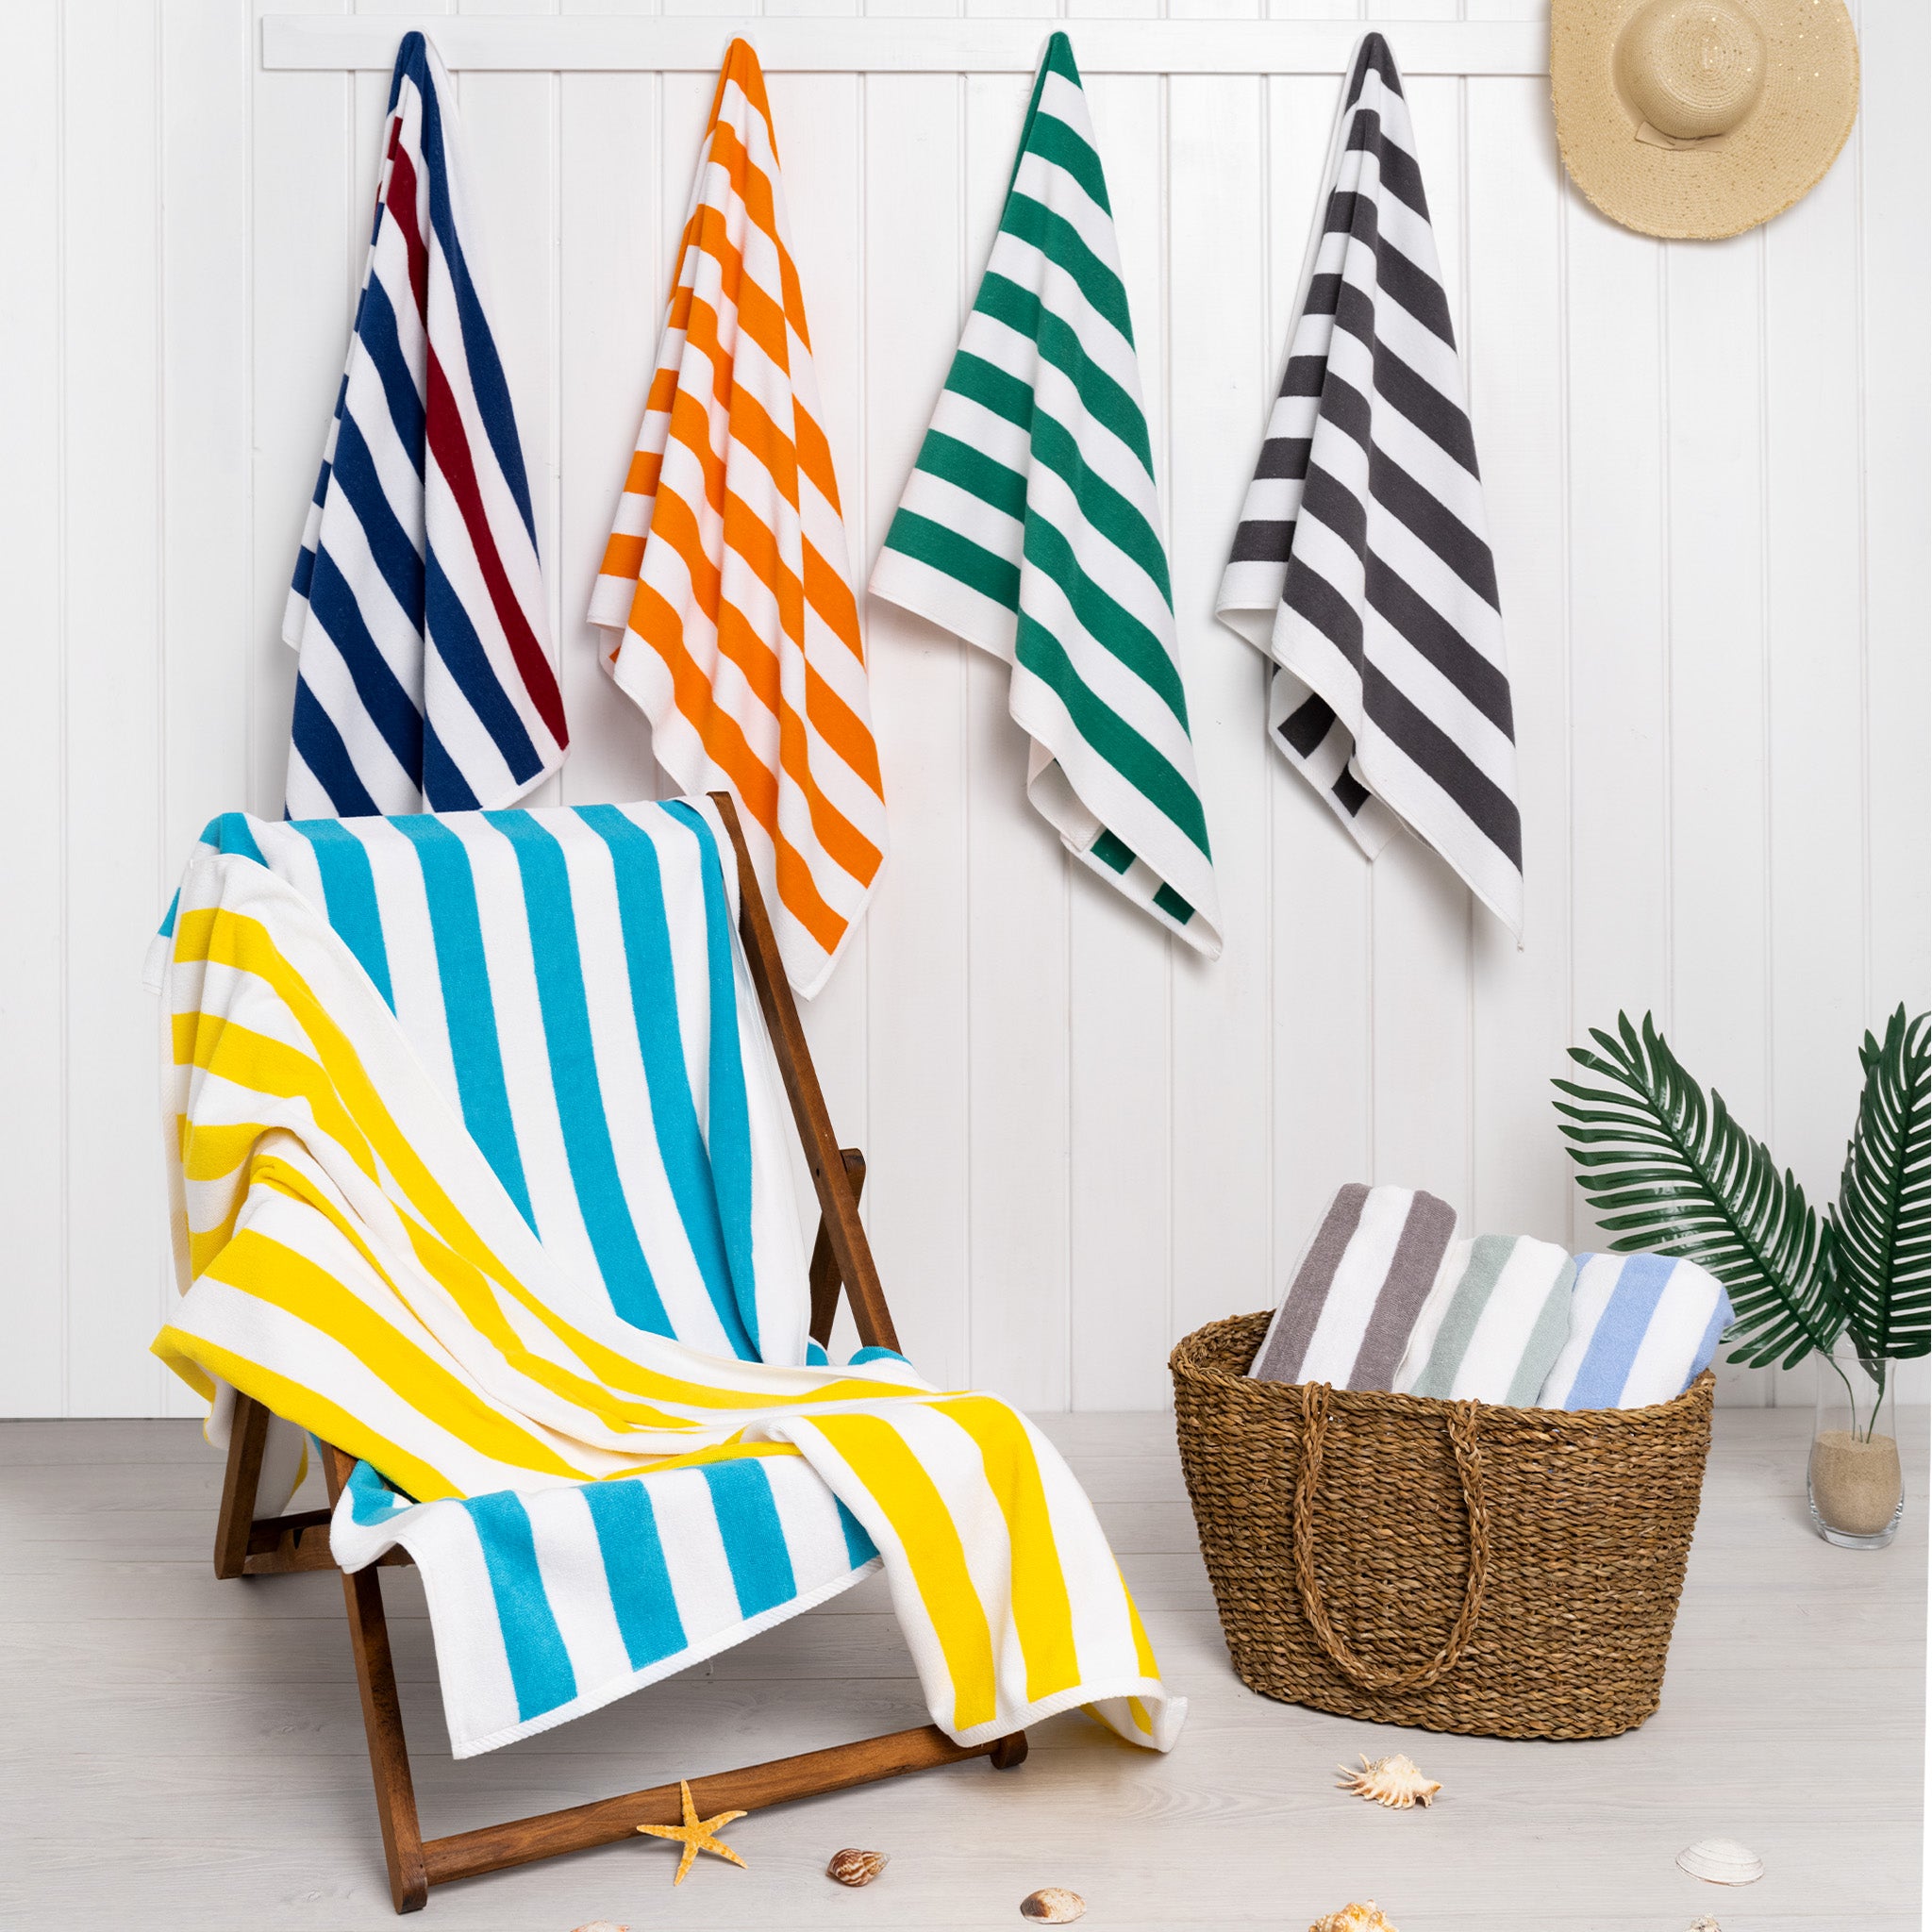 American Soft Linen 100% Cotton 4 Pack Beach Towels Cabana Striped Pool Towels -sky-blue-8